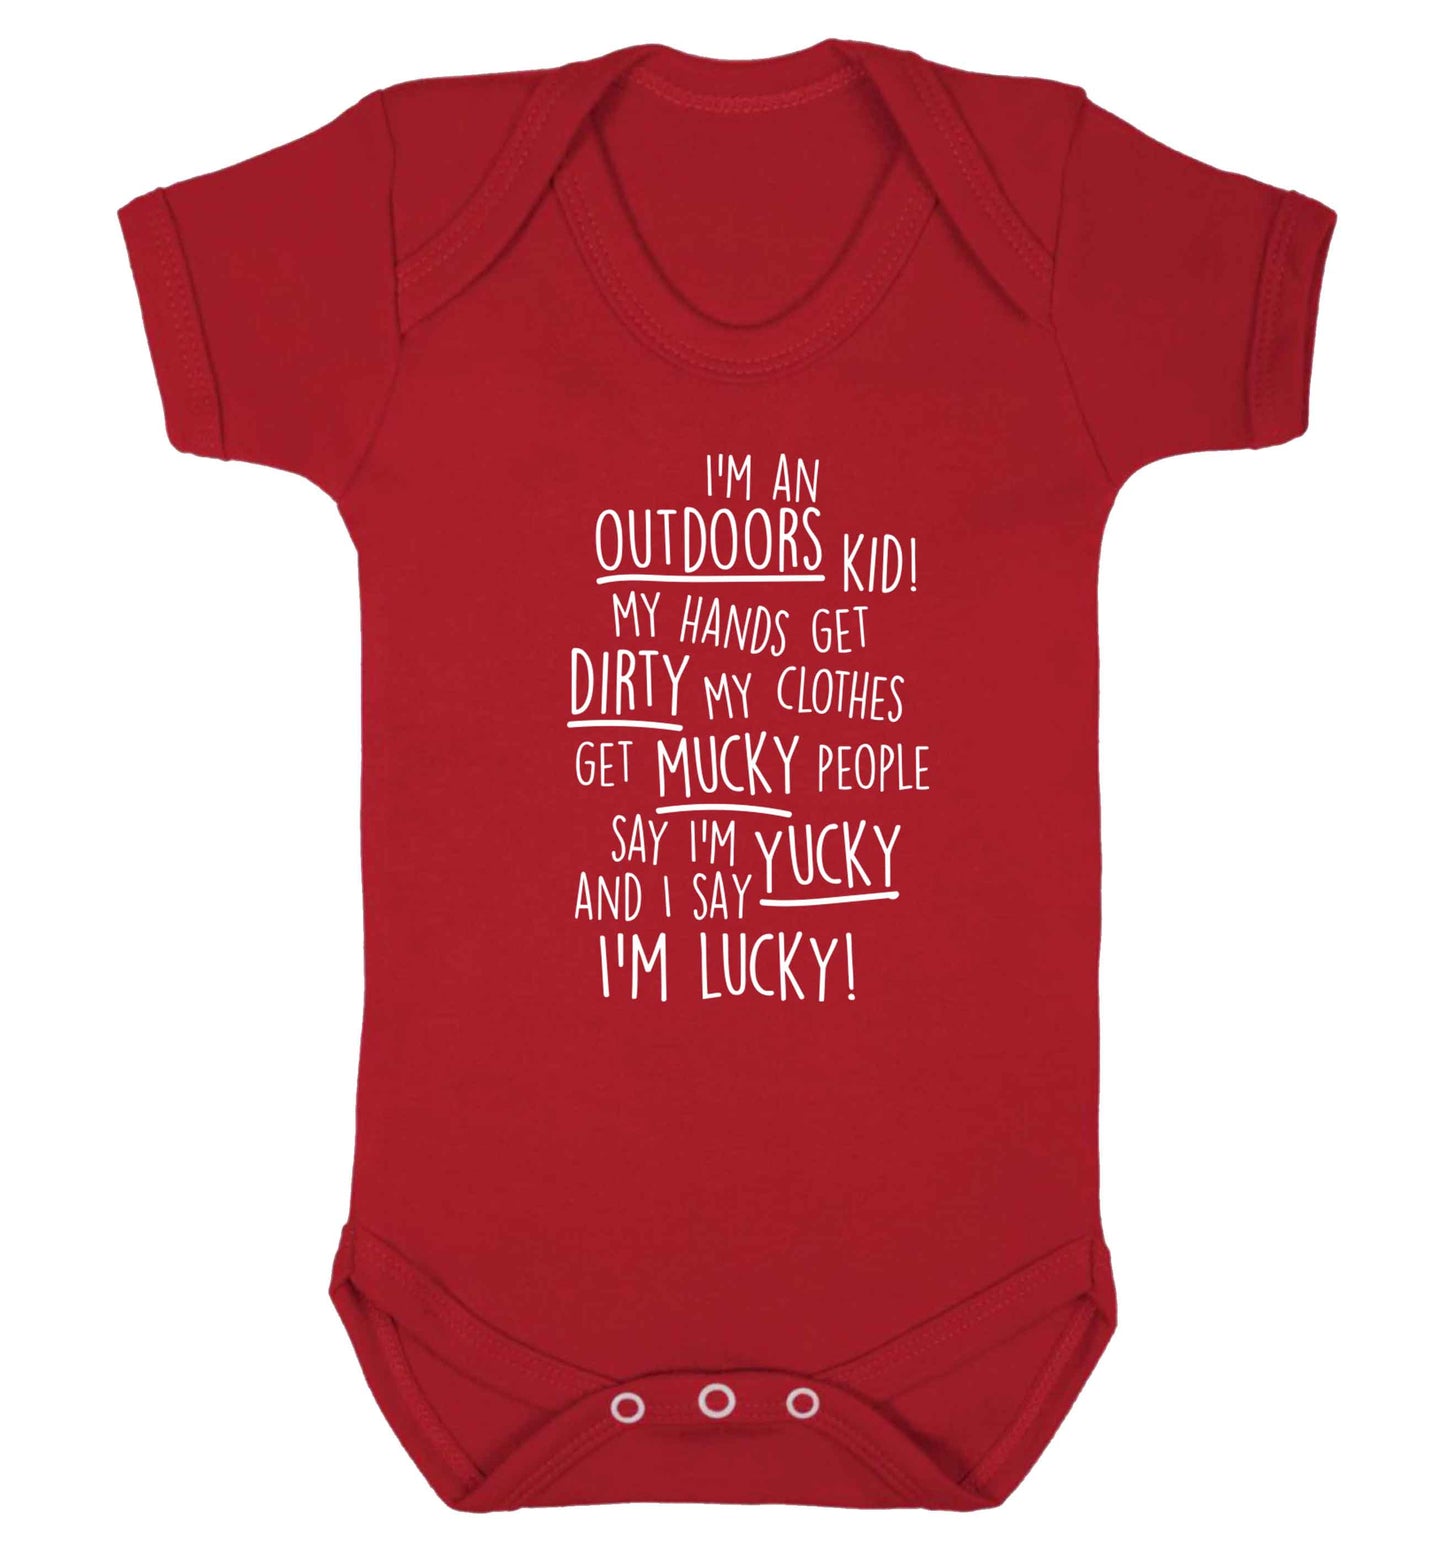 I'm an outdoors kid poem Baby Vest red 18-24 months